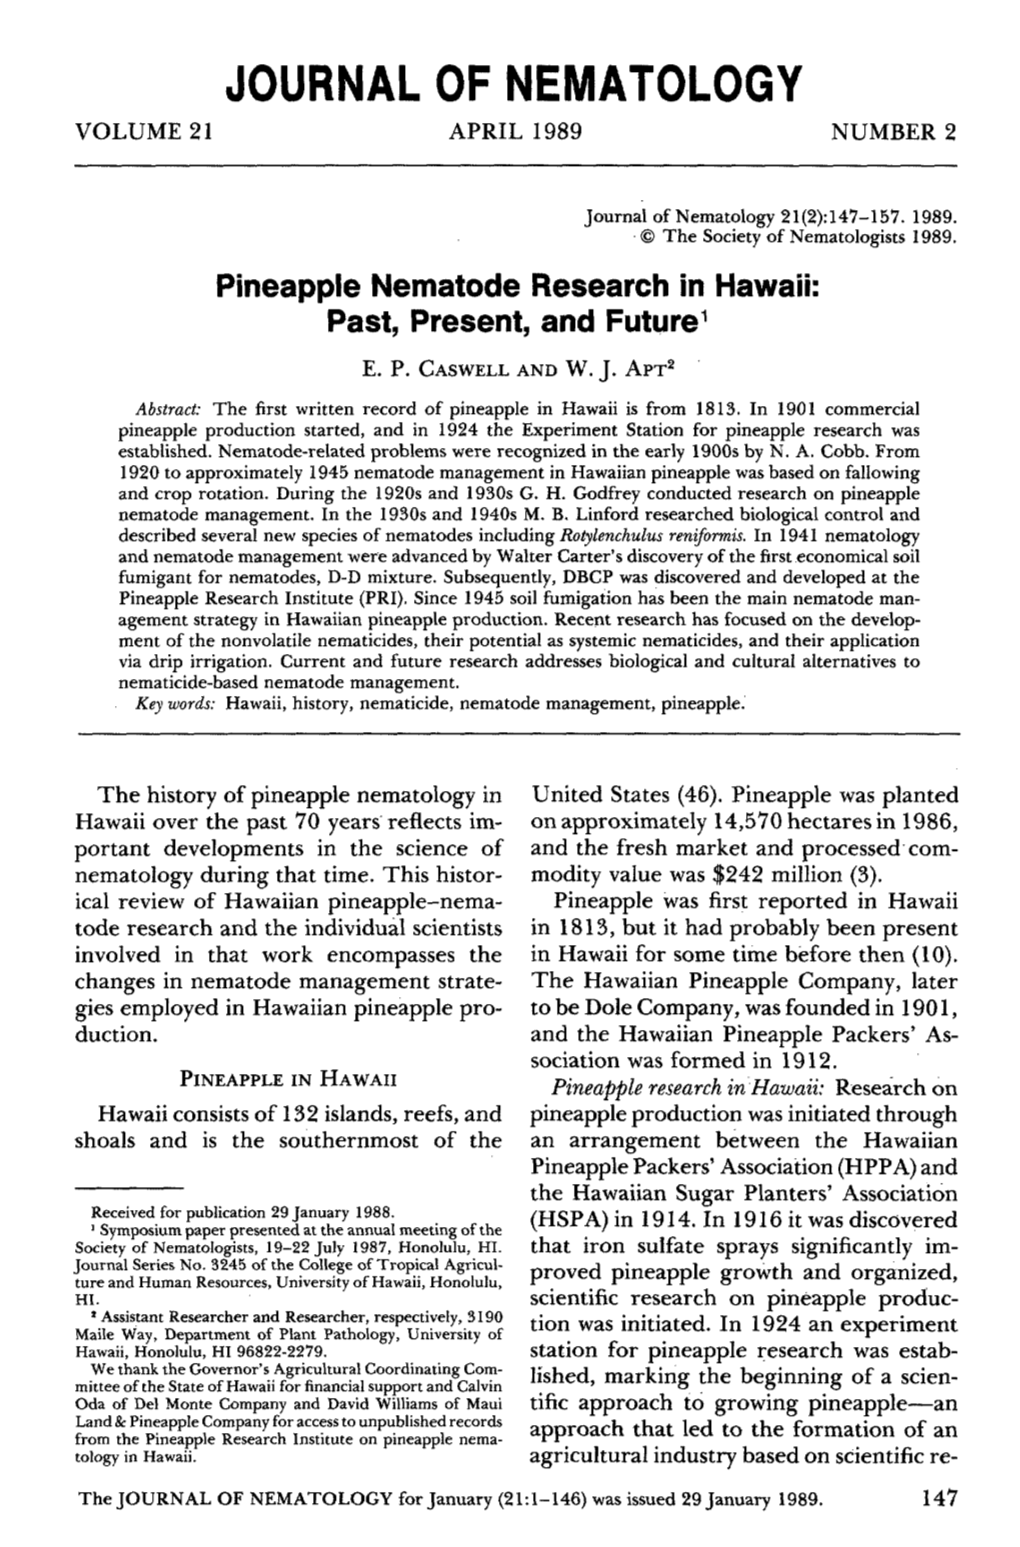 Pineapple Nematode Research in Hawaii: Past, Present, and Future 1 E